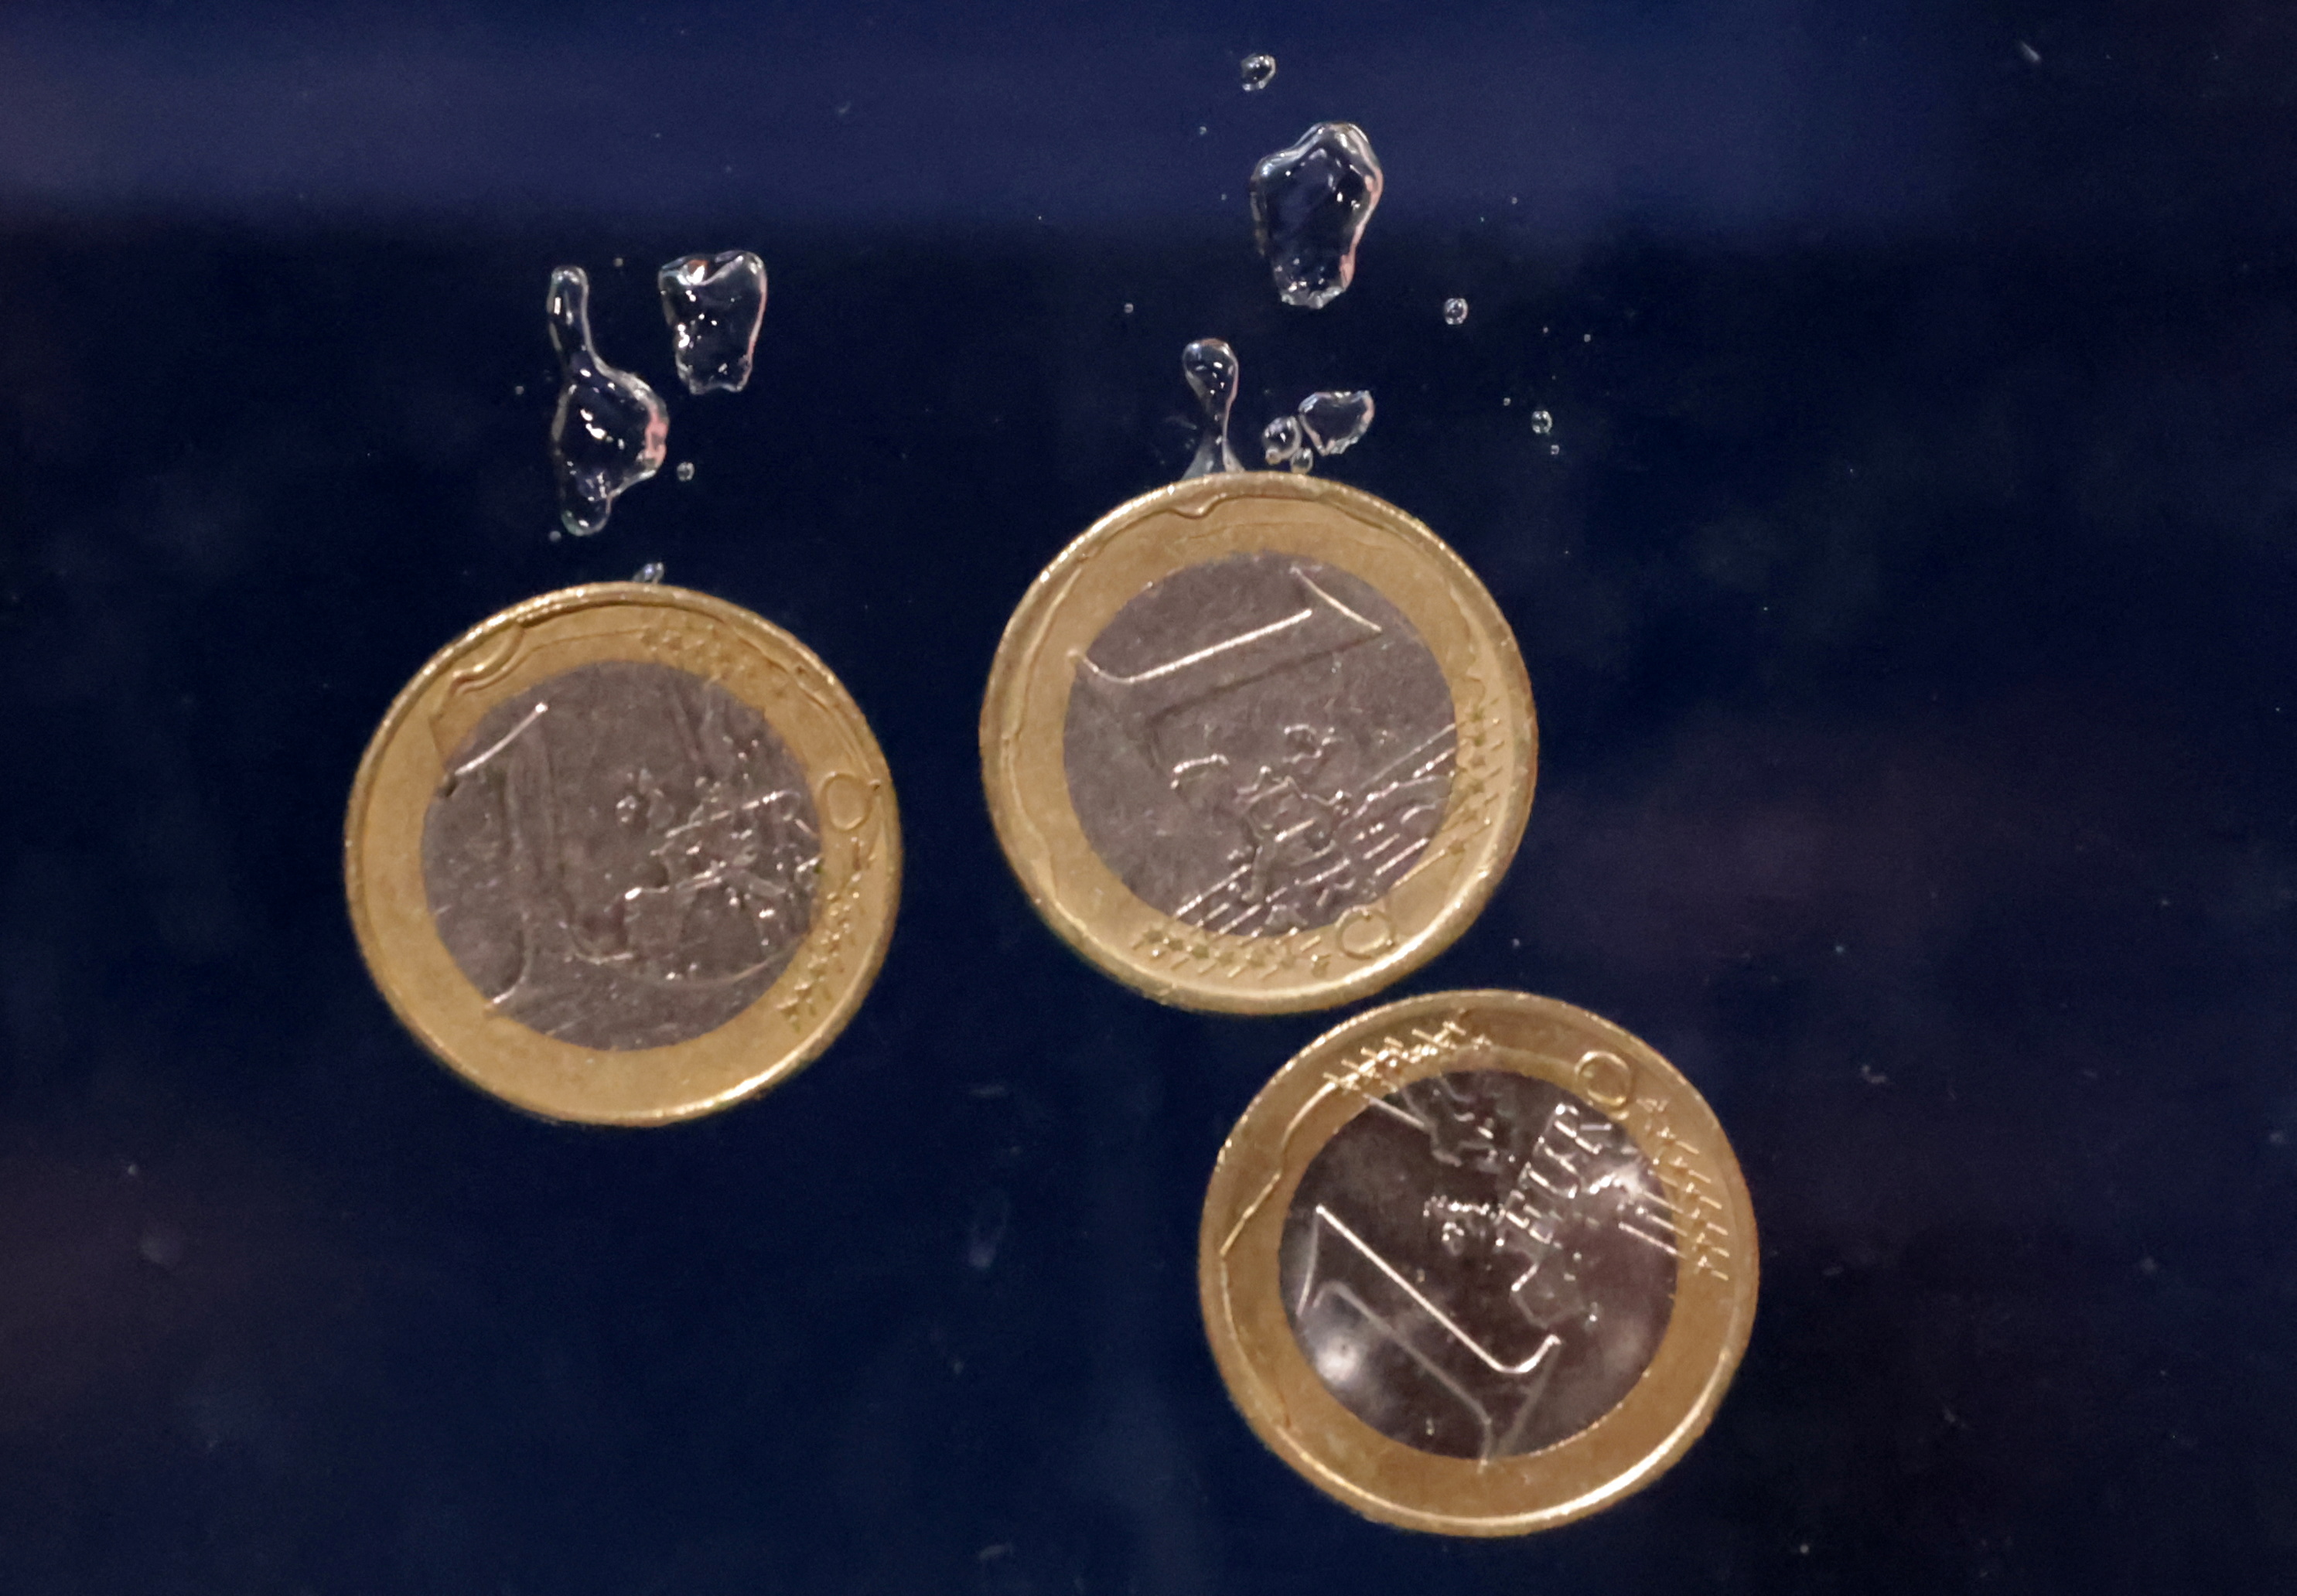 Illustration shows Euro coins plunging into water